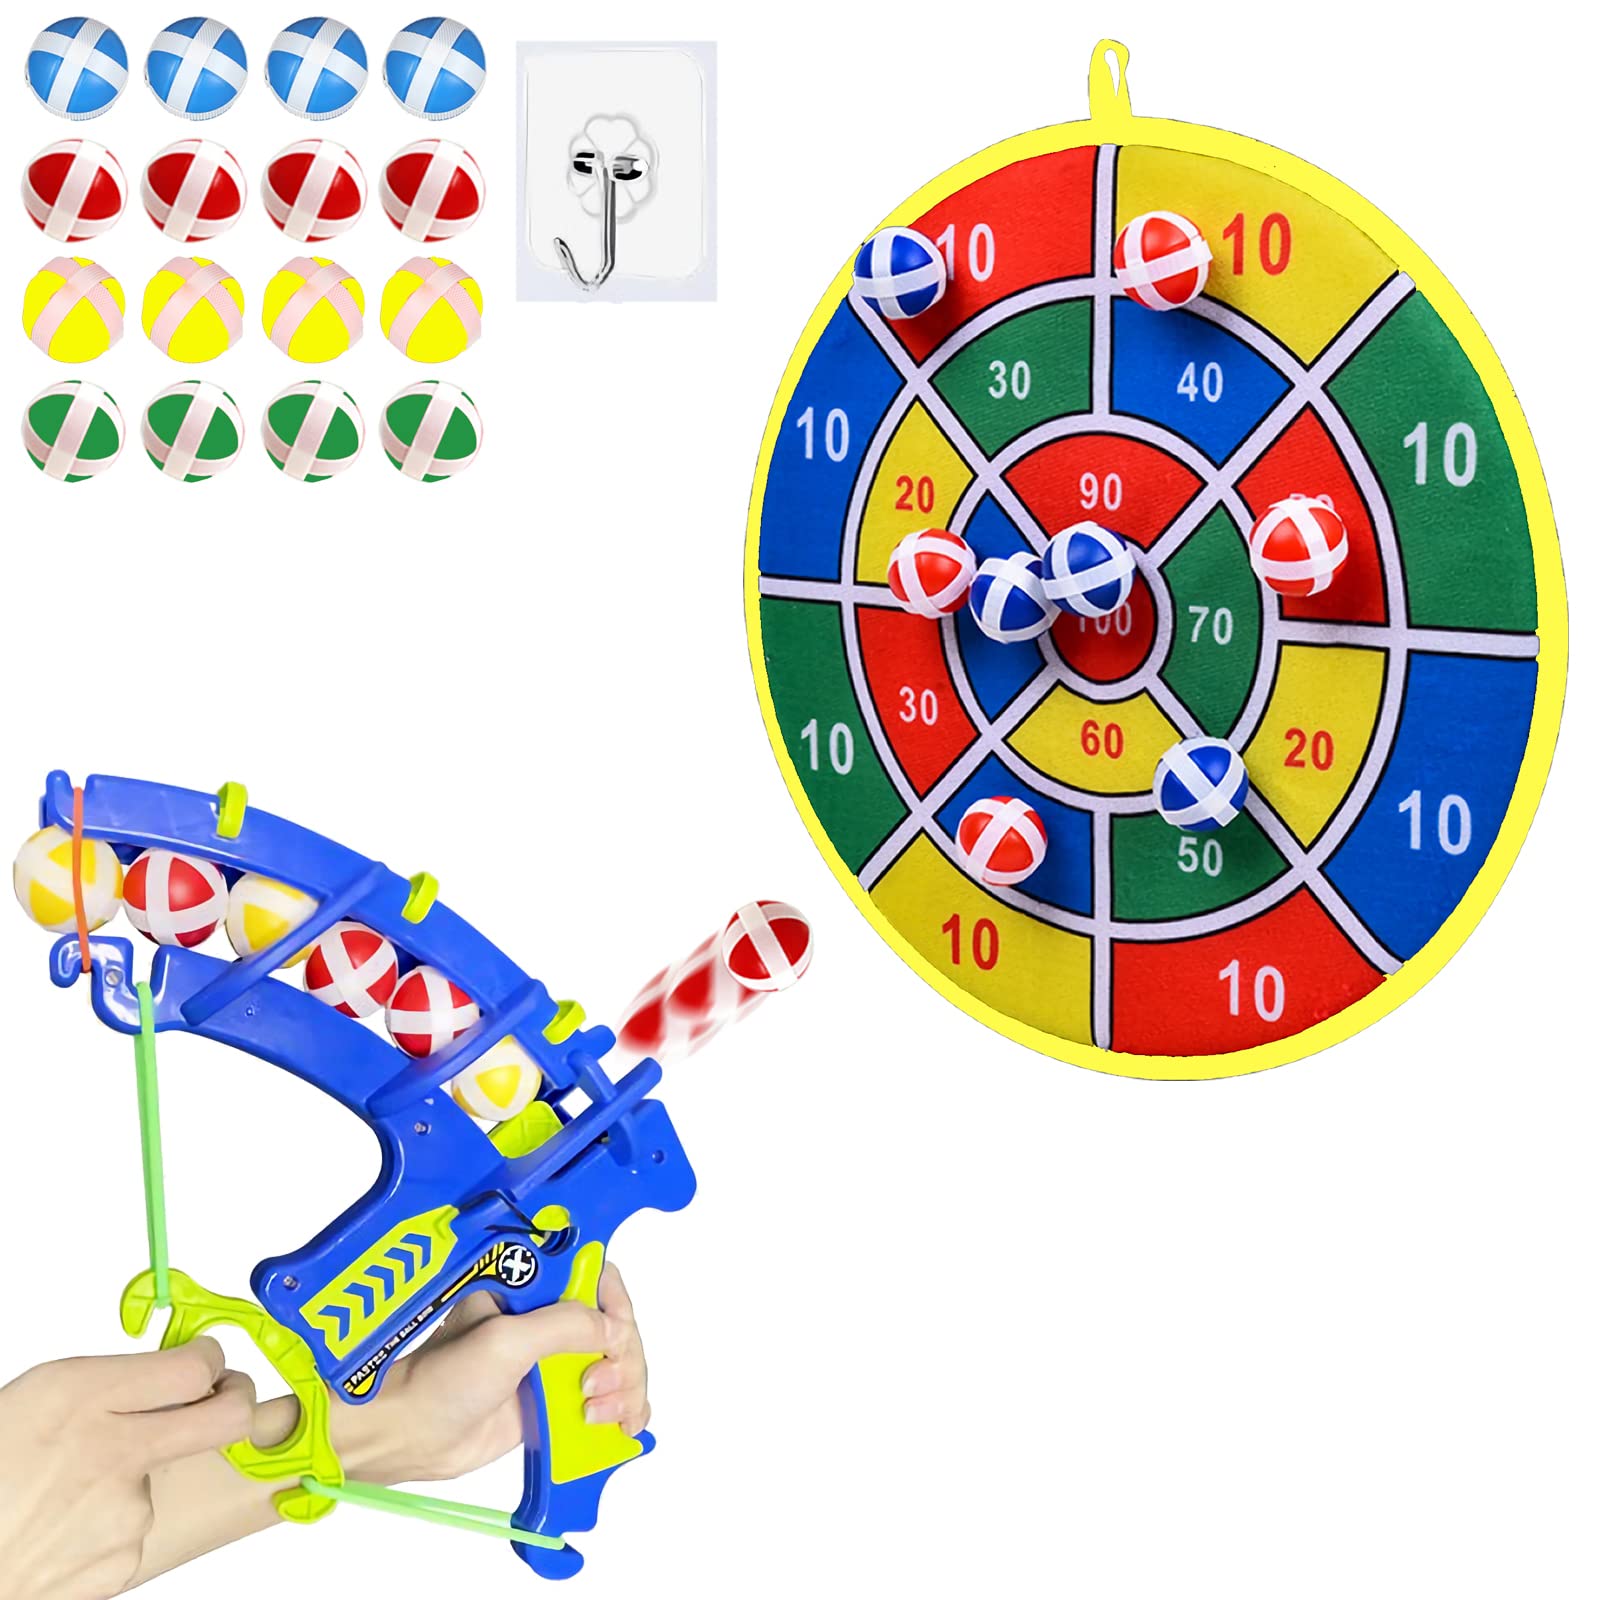 QuRender 29inch Dart Board,1 Sticky Balls Bow and Arrow Launcher,20 Sticky Balls,Toys Gifts for 3 4 5 6 7 8 9 10 11 12 Boys & Girls,Indoor Outdoor Party Sports Play Games Multicolor